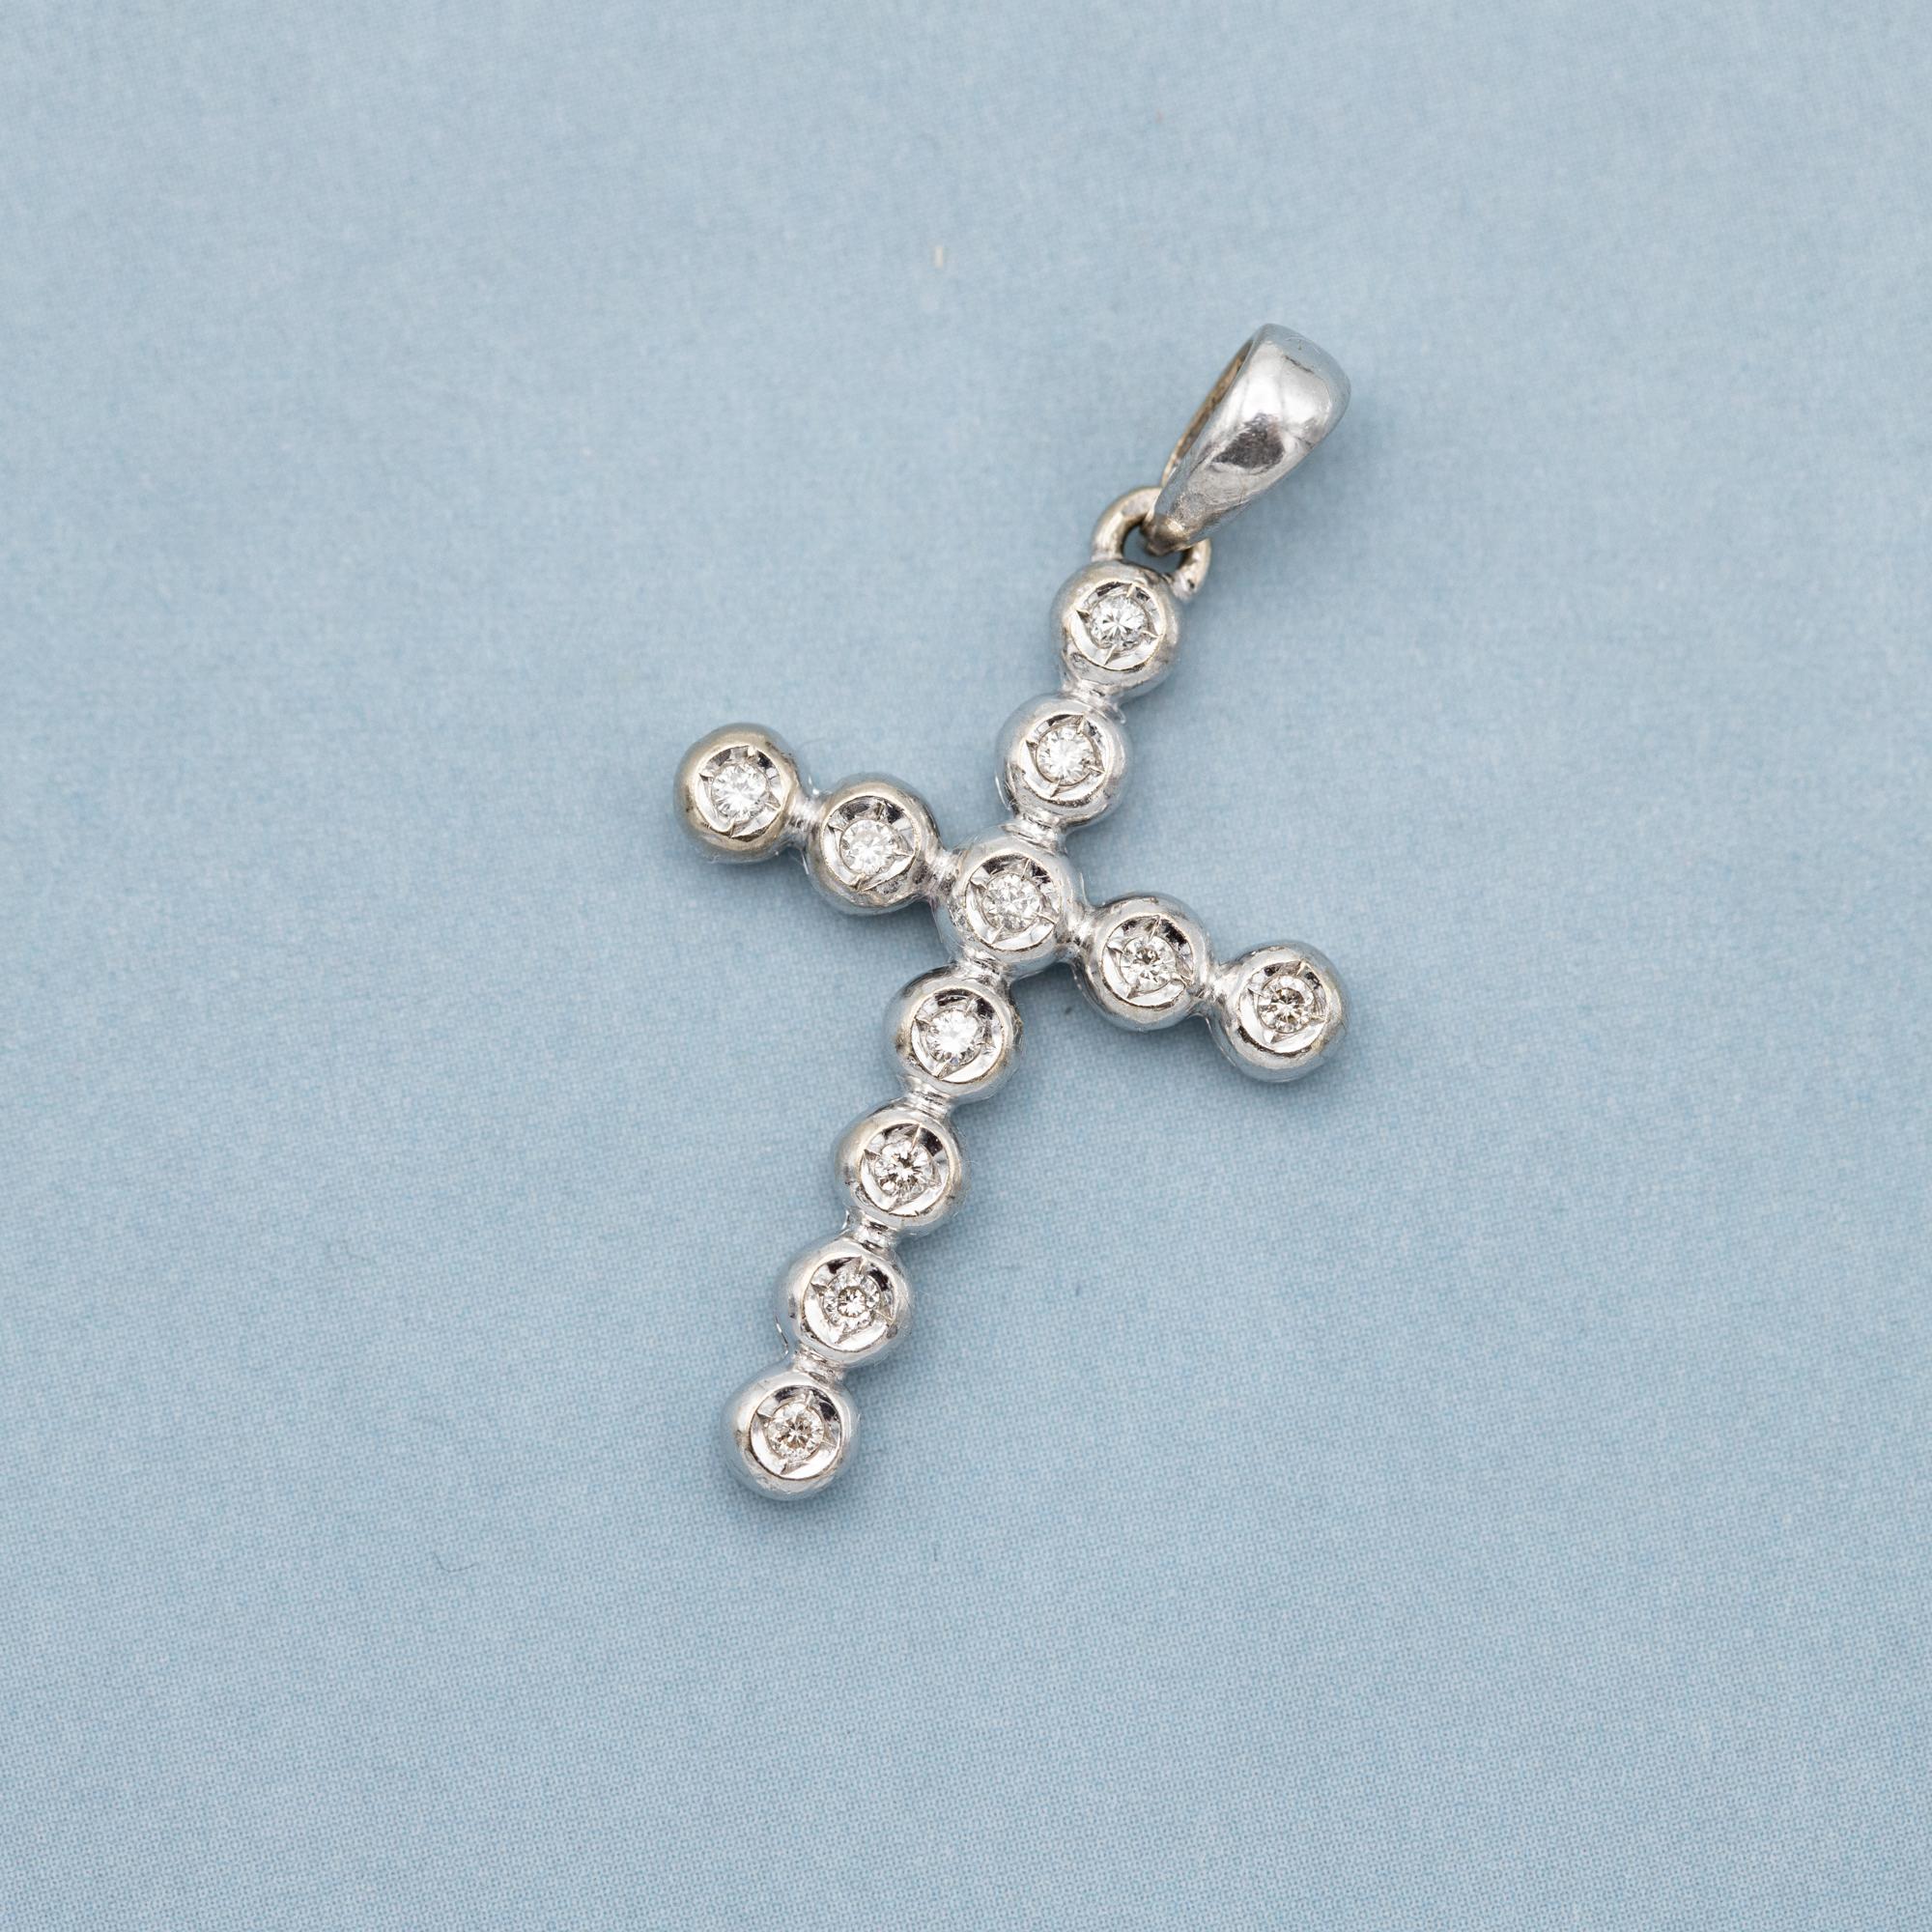 For sale is this lovely 18 K white gold cross pendant. This beautiful detailed little charm is covered with eleven small brilliant cut diamonds which combine for 0,1ct. These sparkling diamonds are placed in the shape of a cross.

This is a